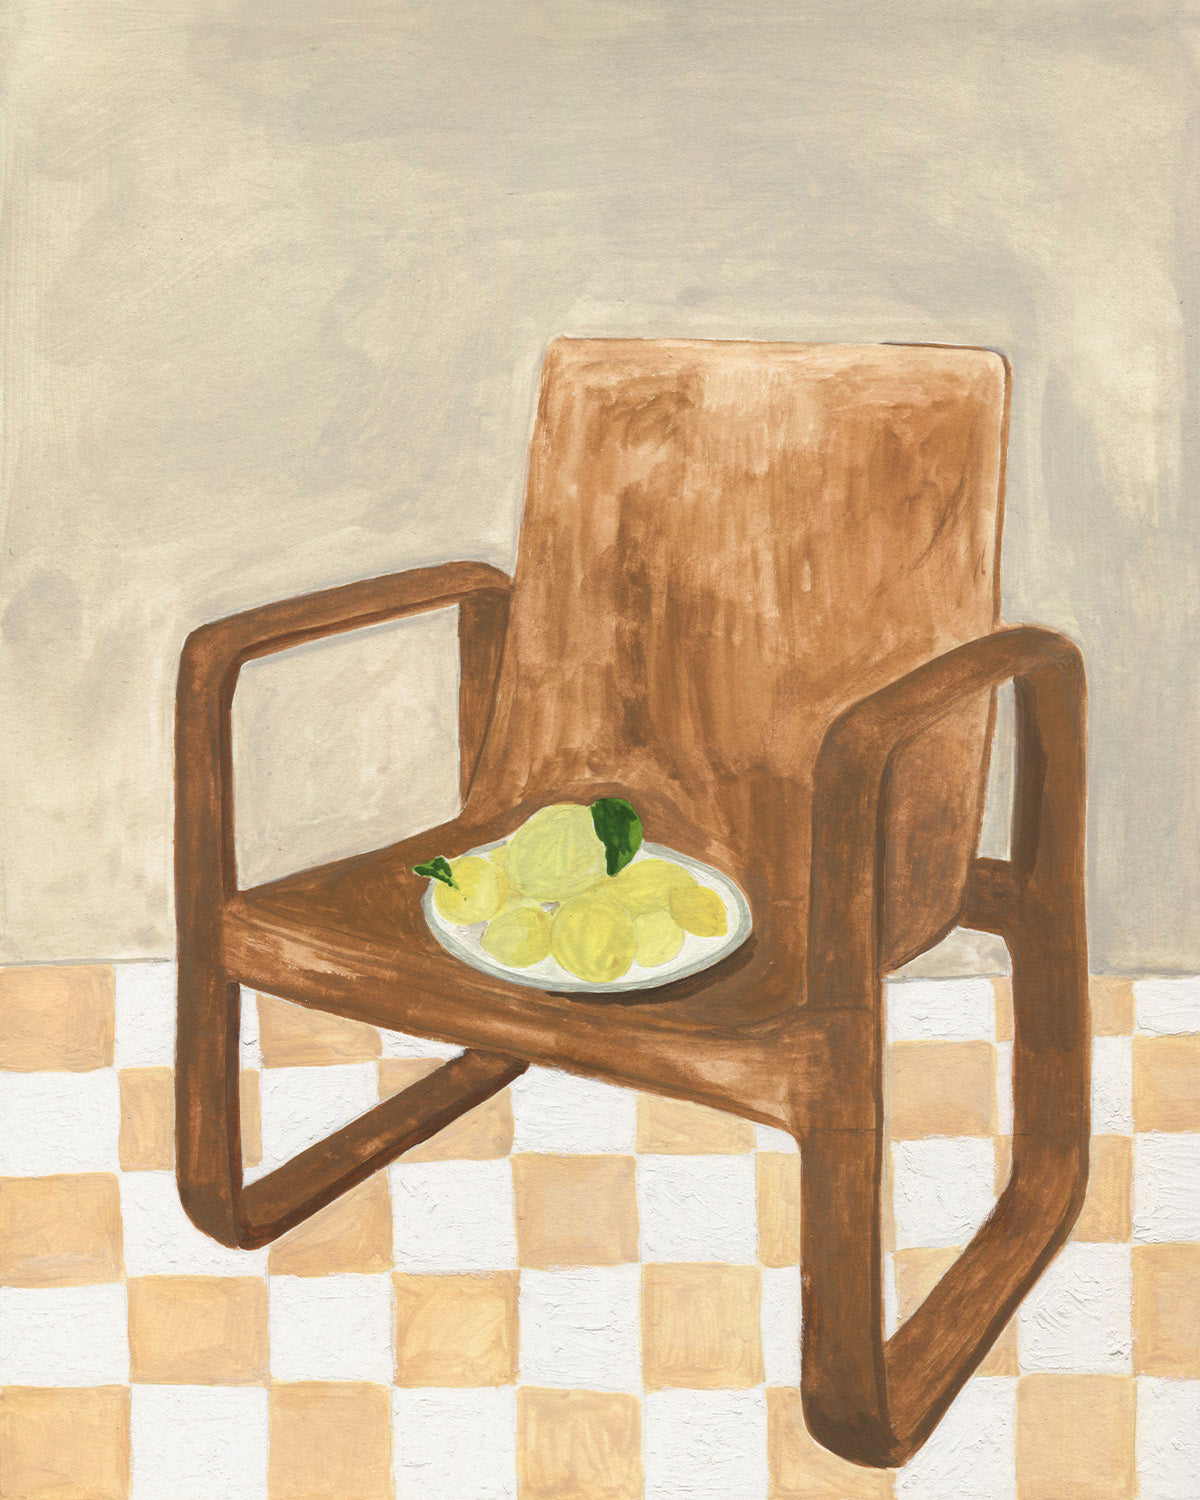 Isabelle Vandeplassche x Bed Threads 'Chair With Lemons' Print